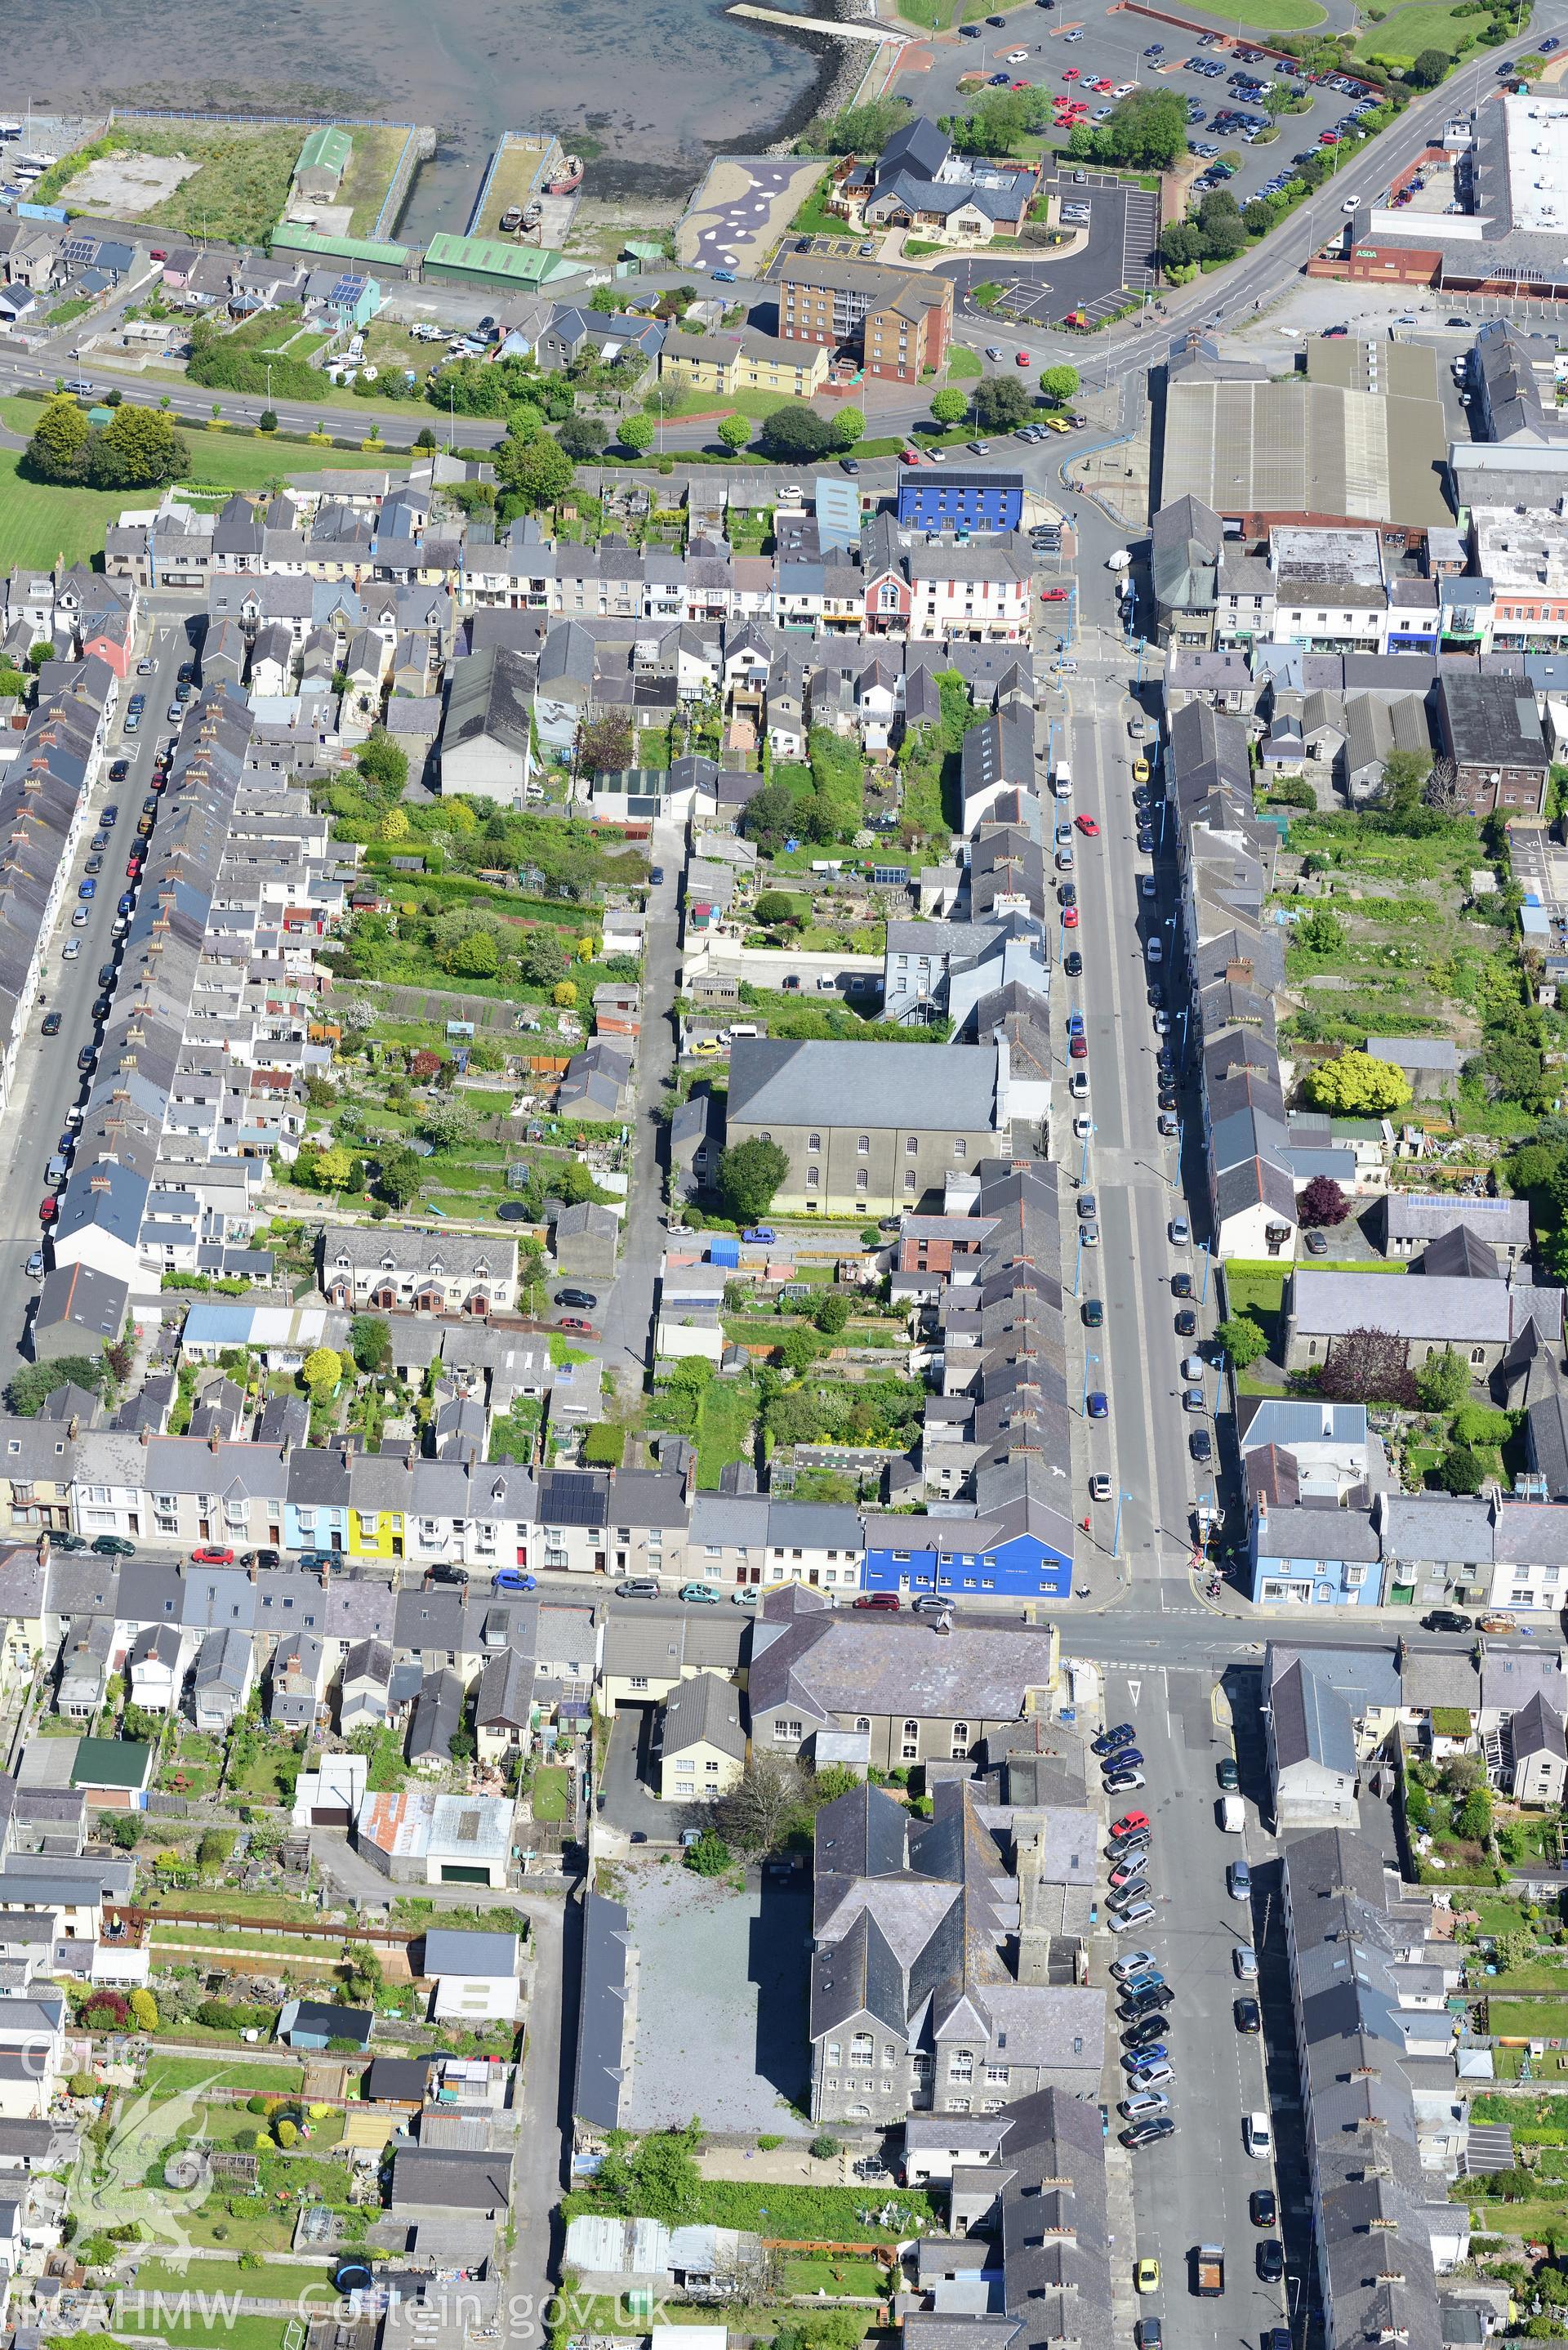 The site of the former British School and Zion Wesleyan Methodist Chapel, Pembroke Dock. Oblique aerial photograph taken during the Royal Commission's programme of archaeological aerial reconnaissance by Toby Driver on 13th May 2015.